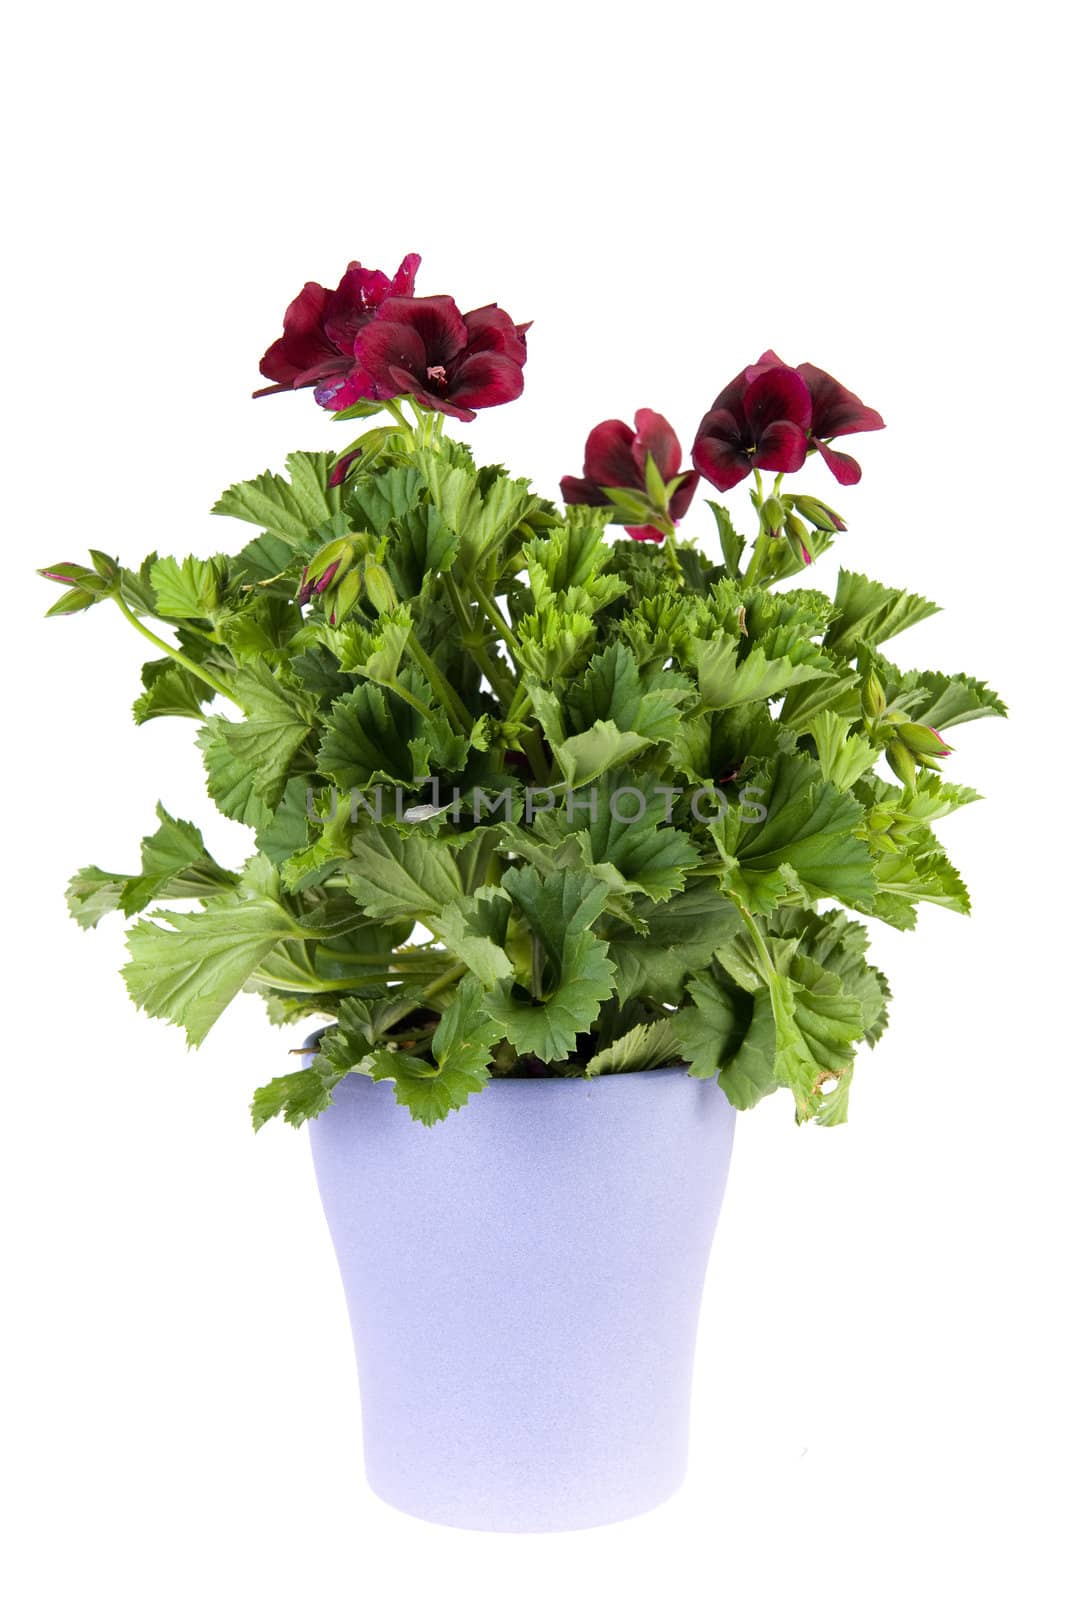 colorful petunia in a vase on a white background